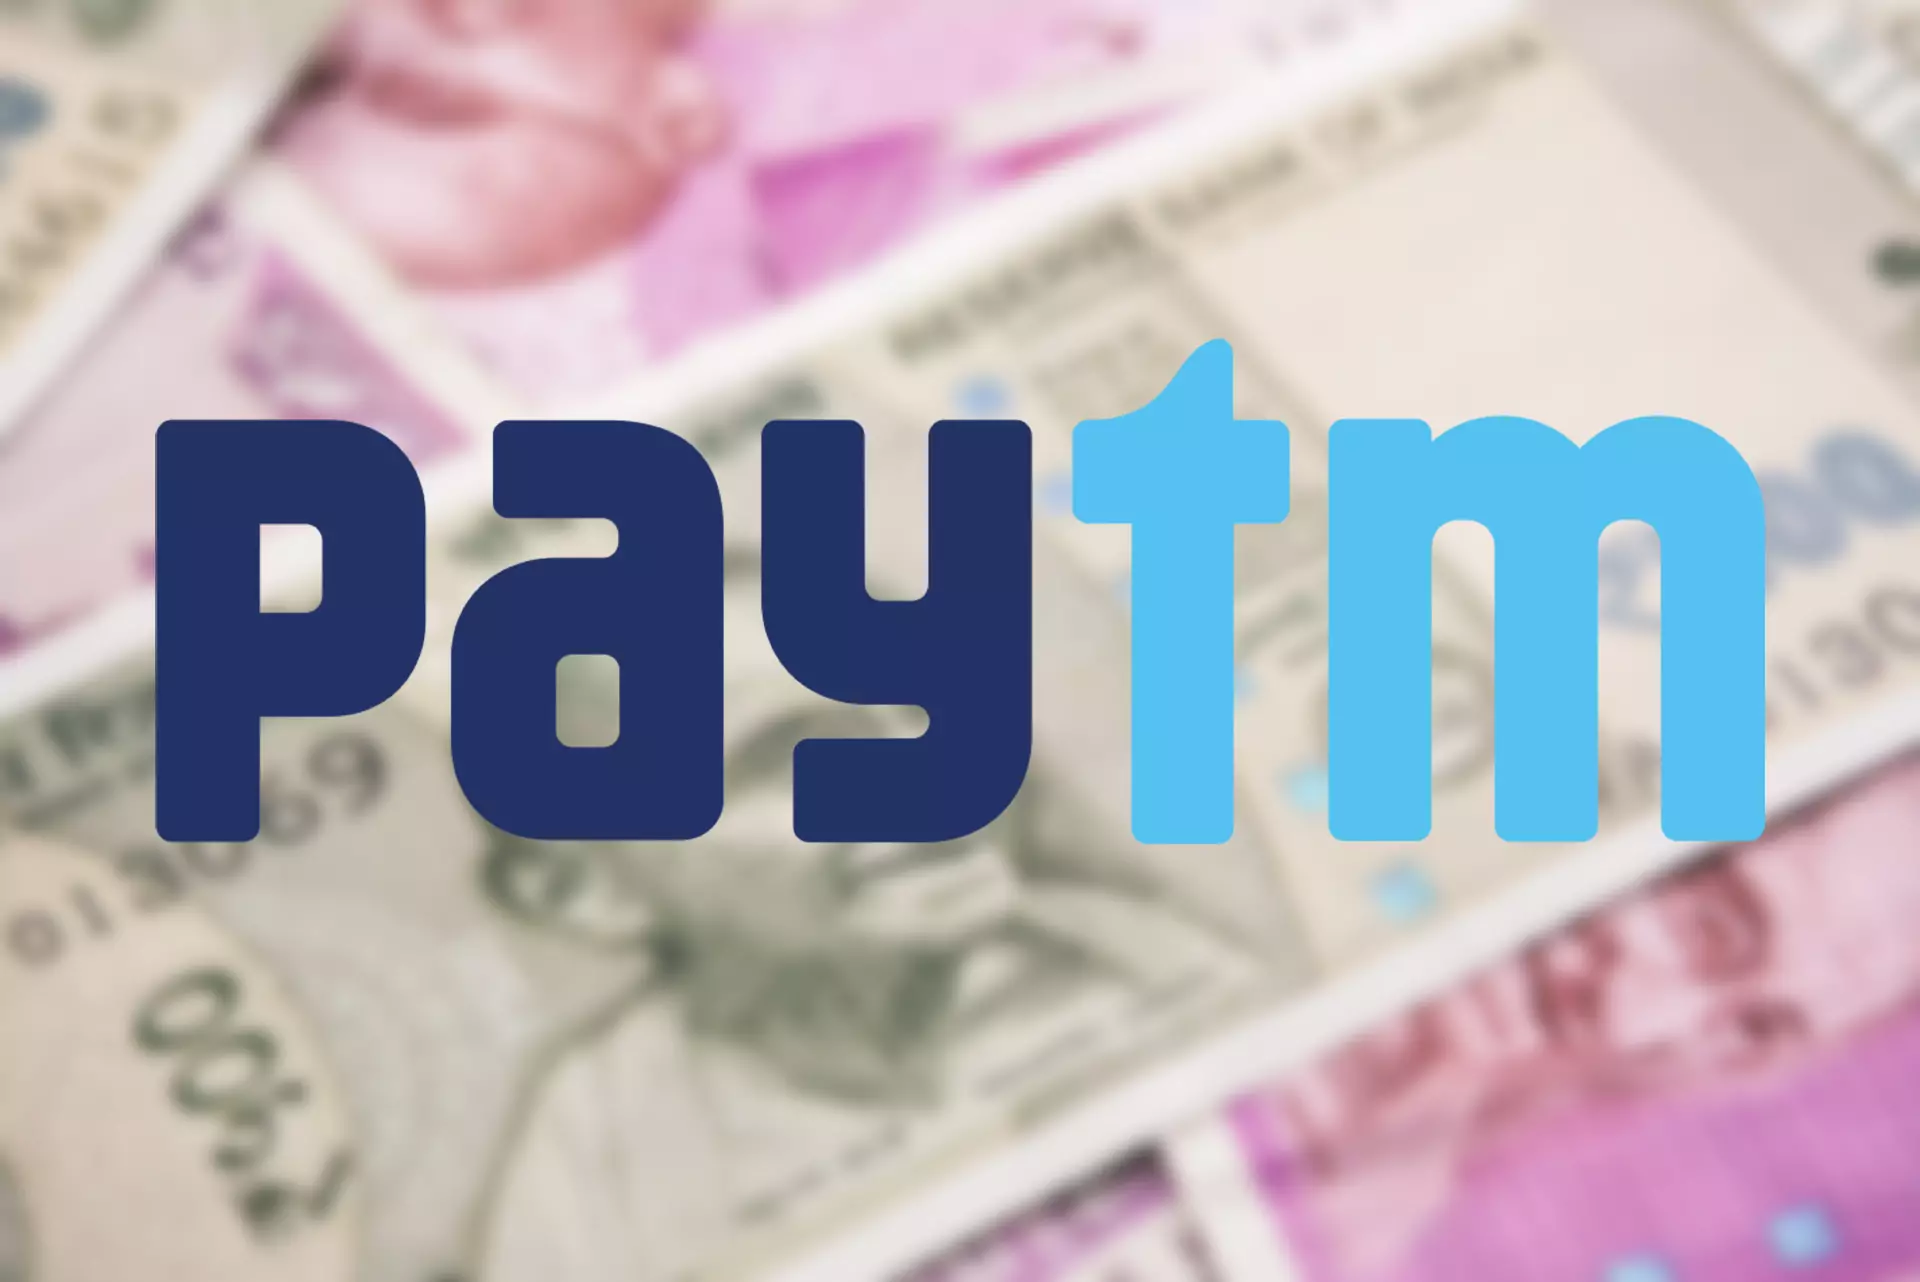 Use PayTm to make a deposit to a cricket betting site.